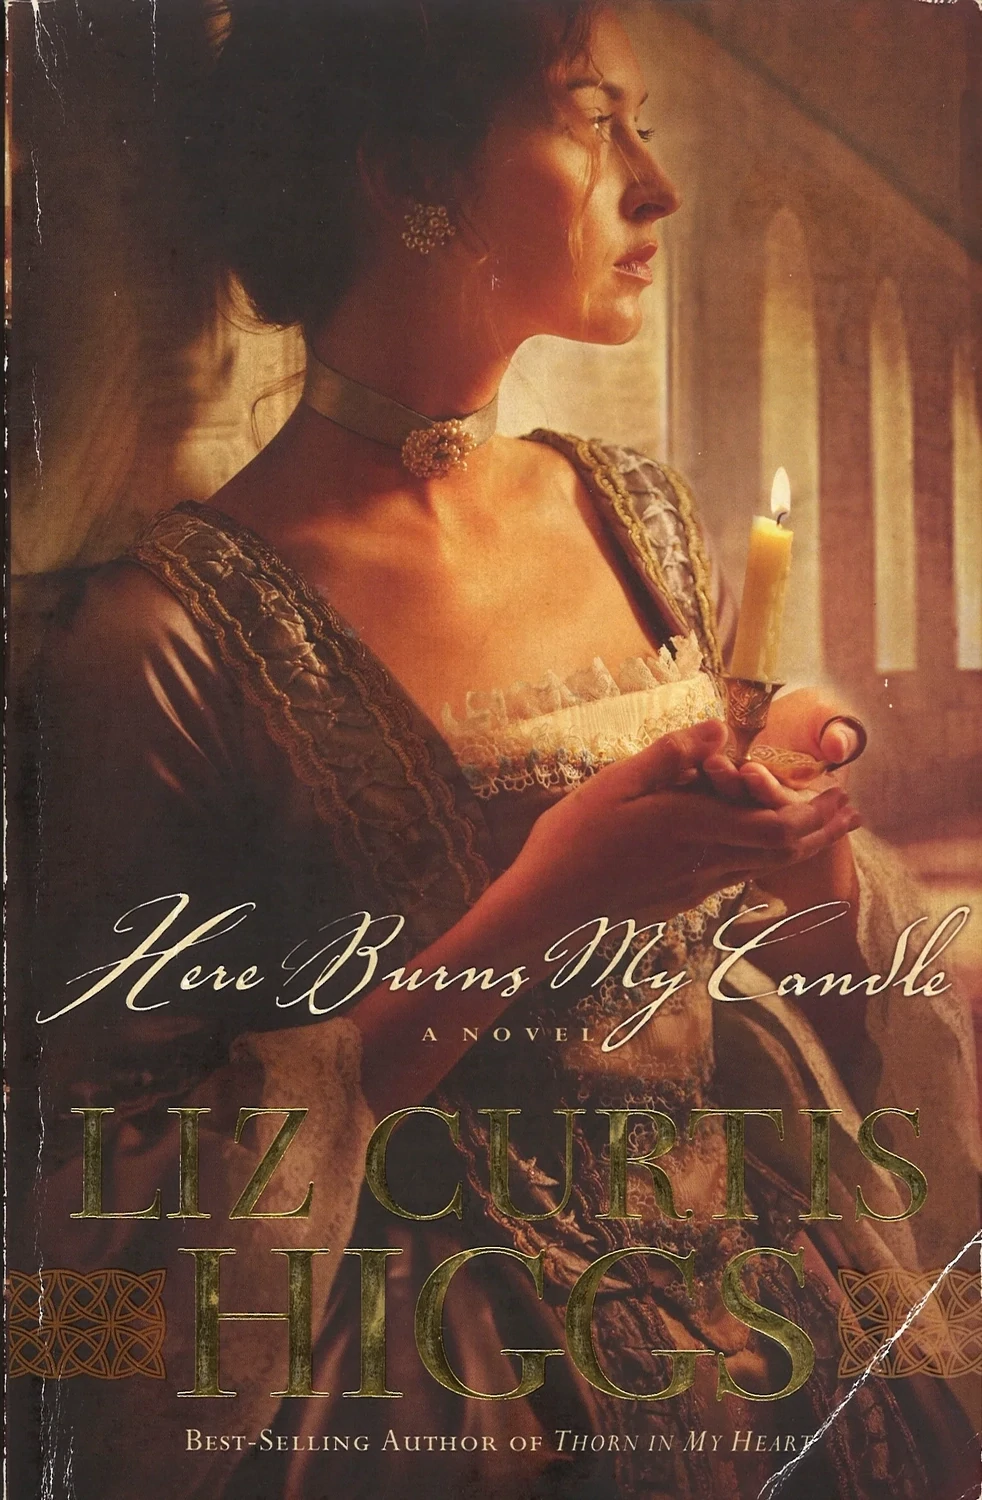 Here Burns My Candle by Liz Curtis Higgs